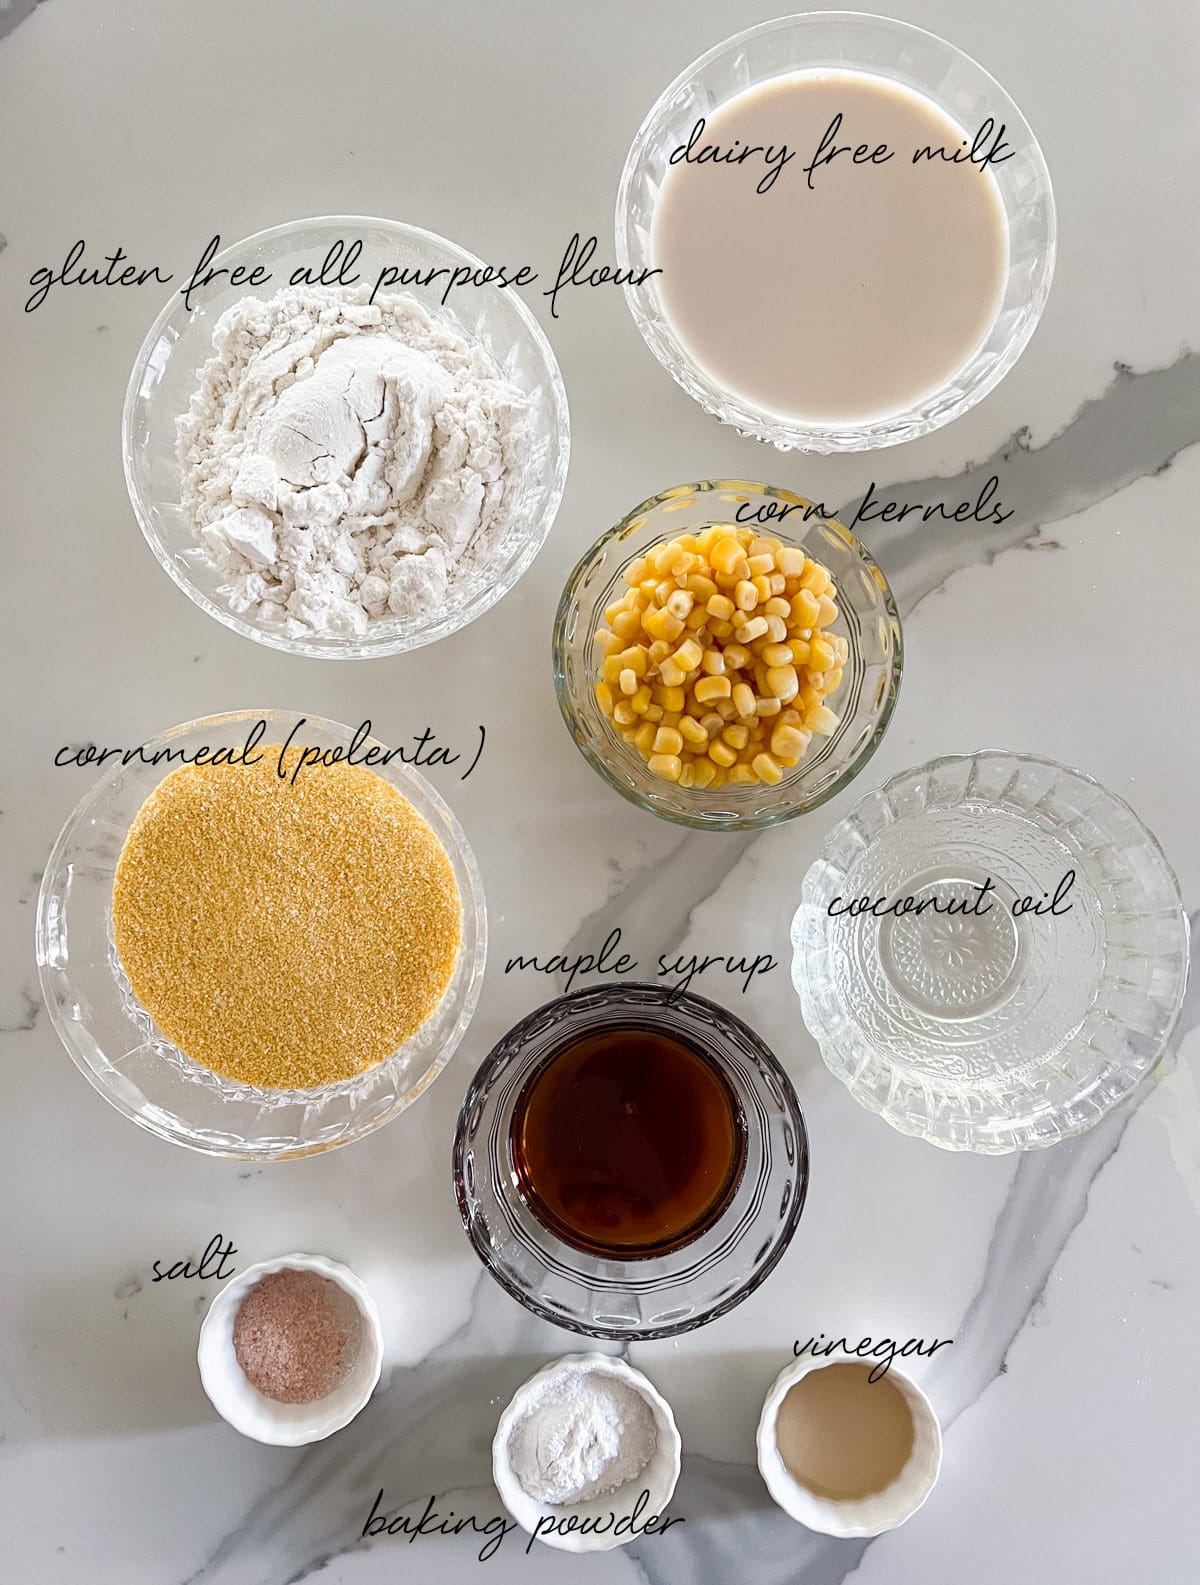 gluten free flour, dairy free milk, cornmeal, corn kernels, maple syrup, coconut oil, salt, baking powder and vinegar laid out in bowls